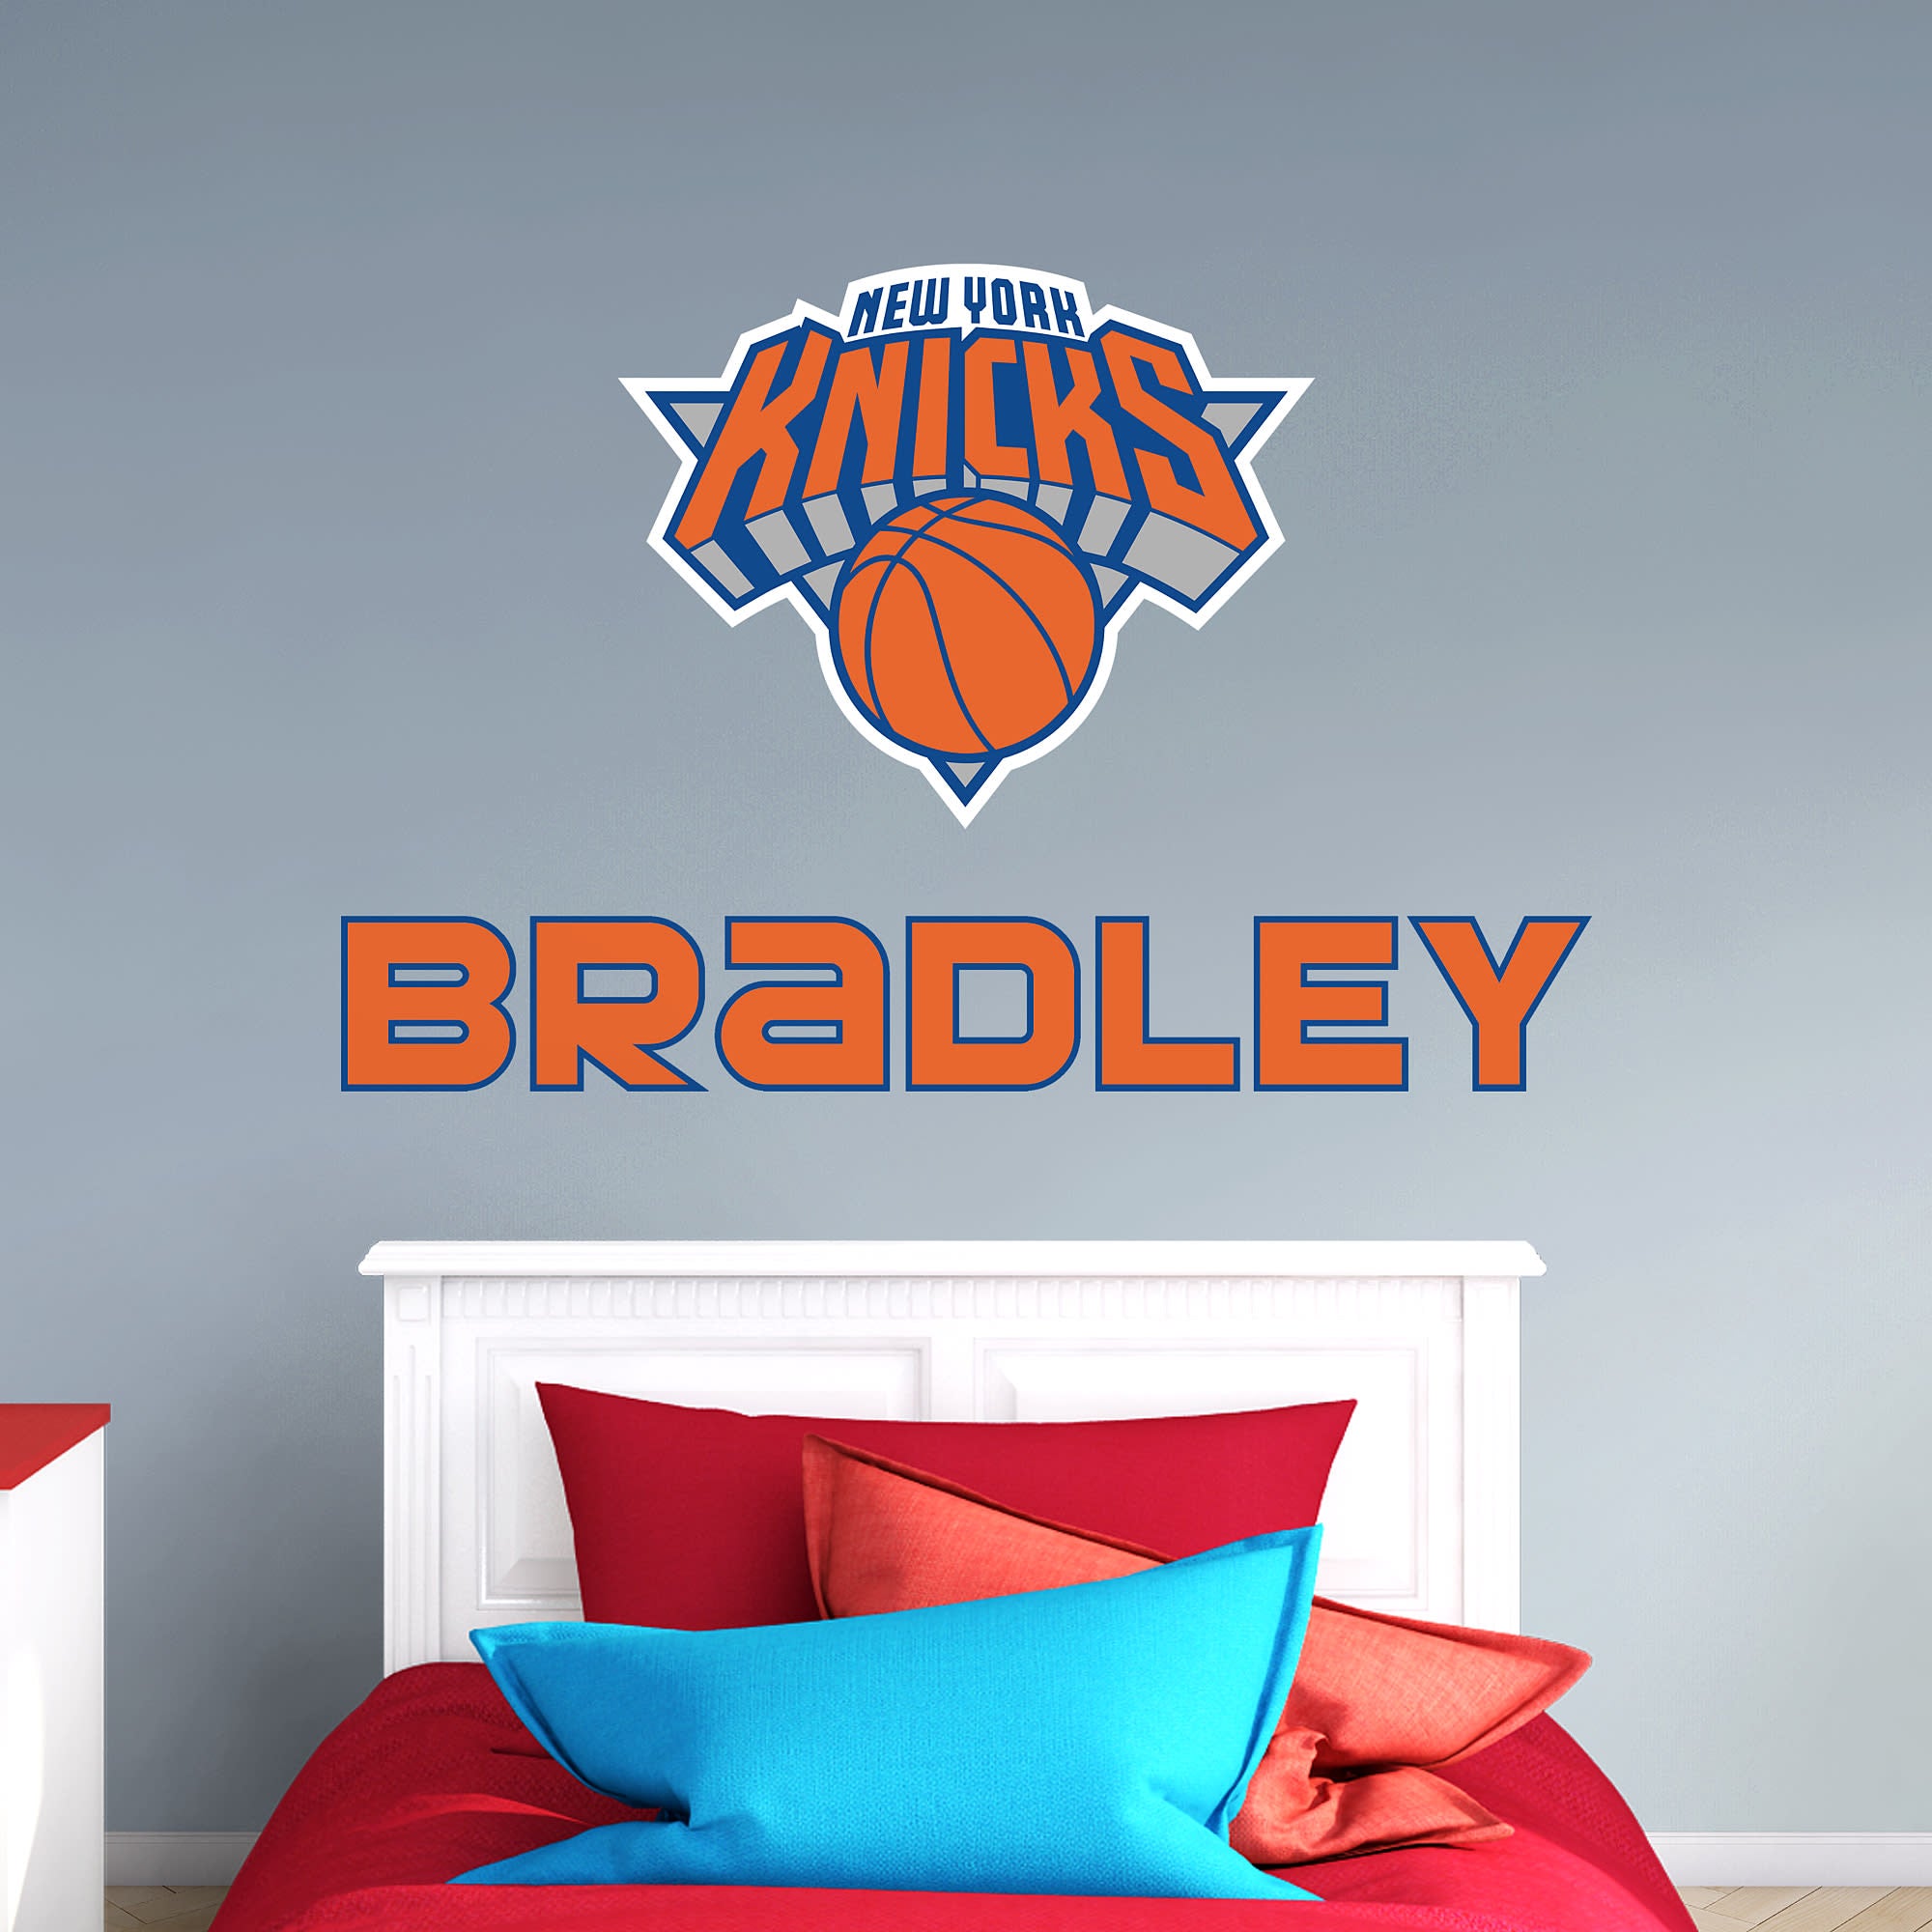 New York Knicks: Stacked Personalized Name - Officially Licensed NBA Transfer Decal in Orange (52"W x 39.5"H) by Fathead | Vinyl